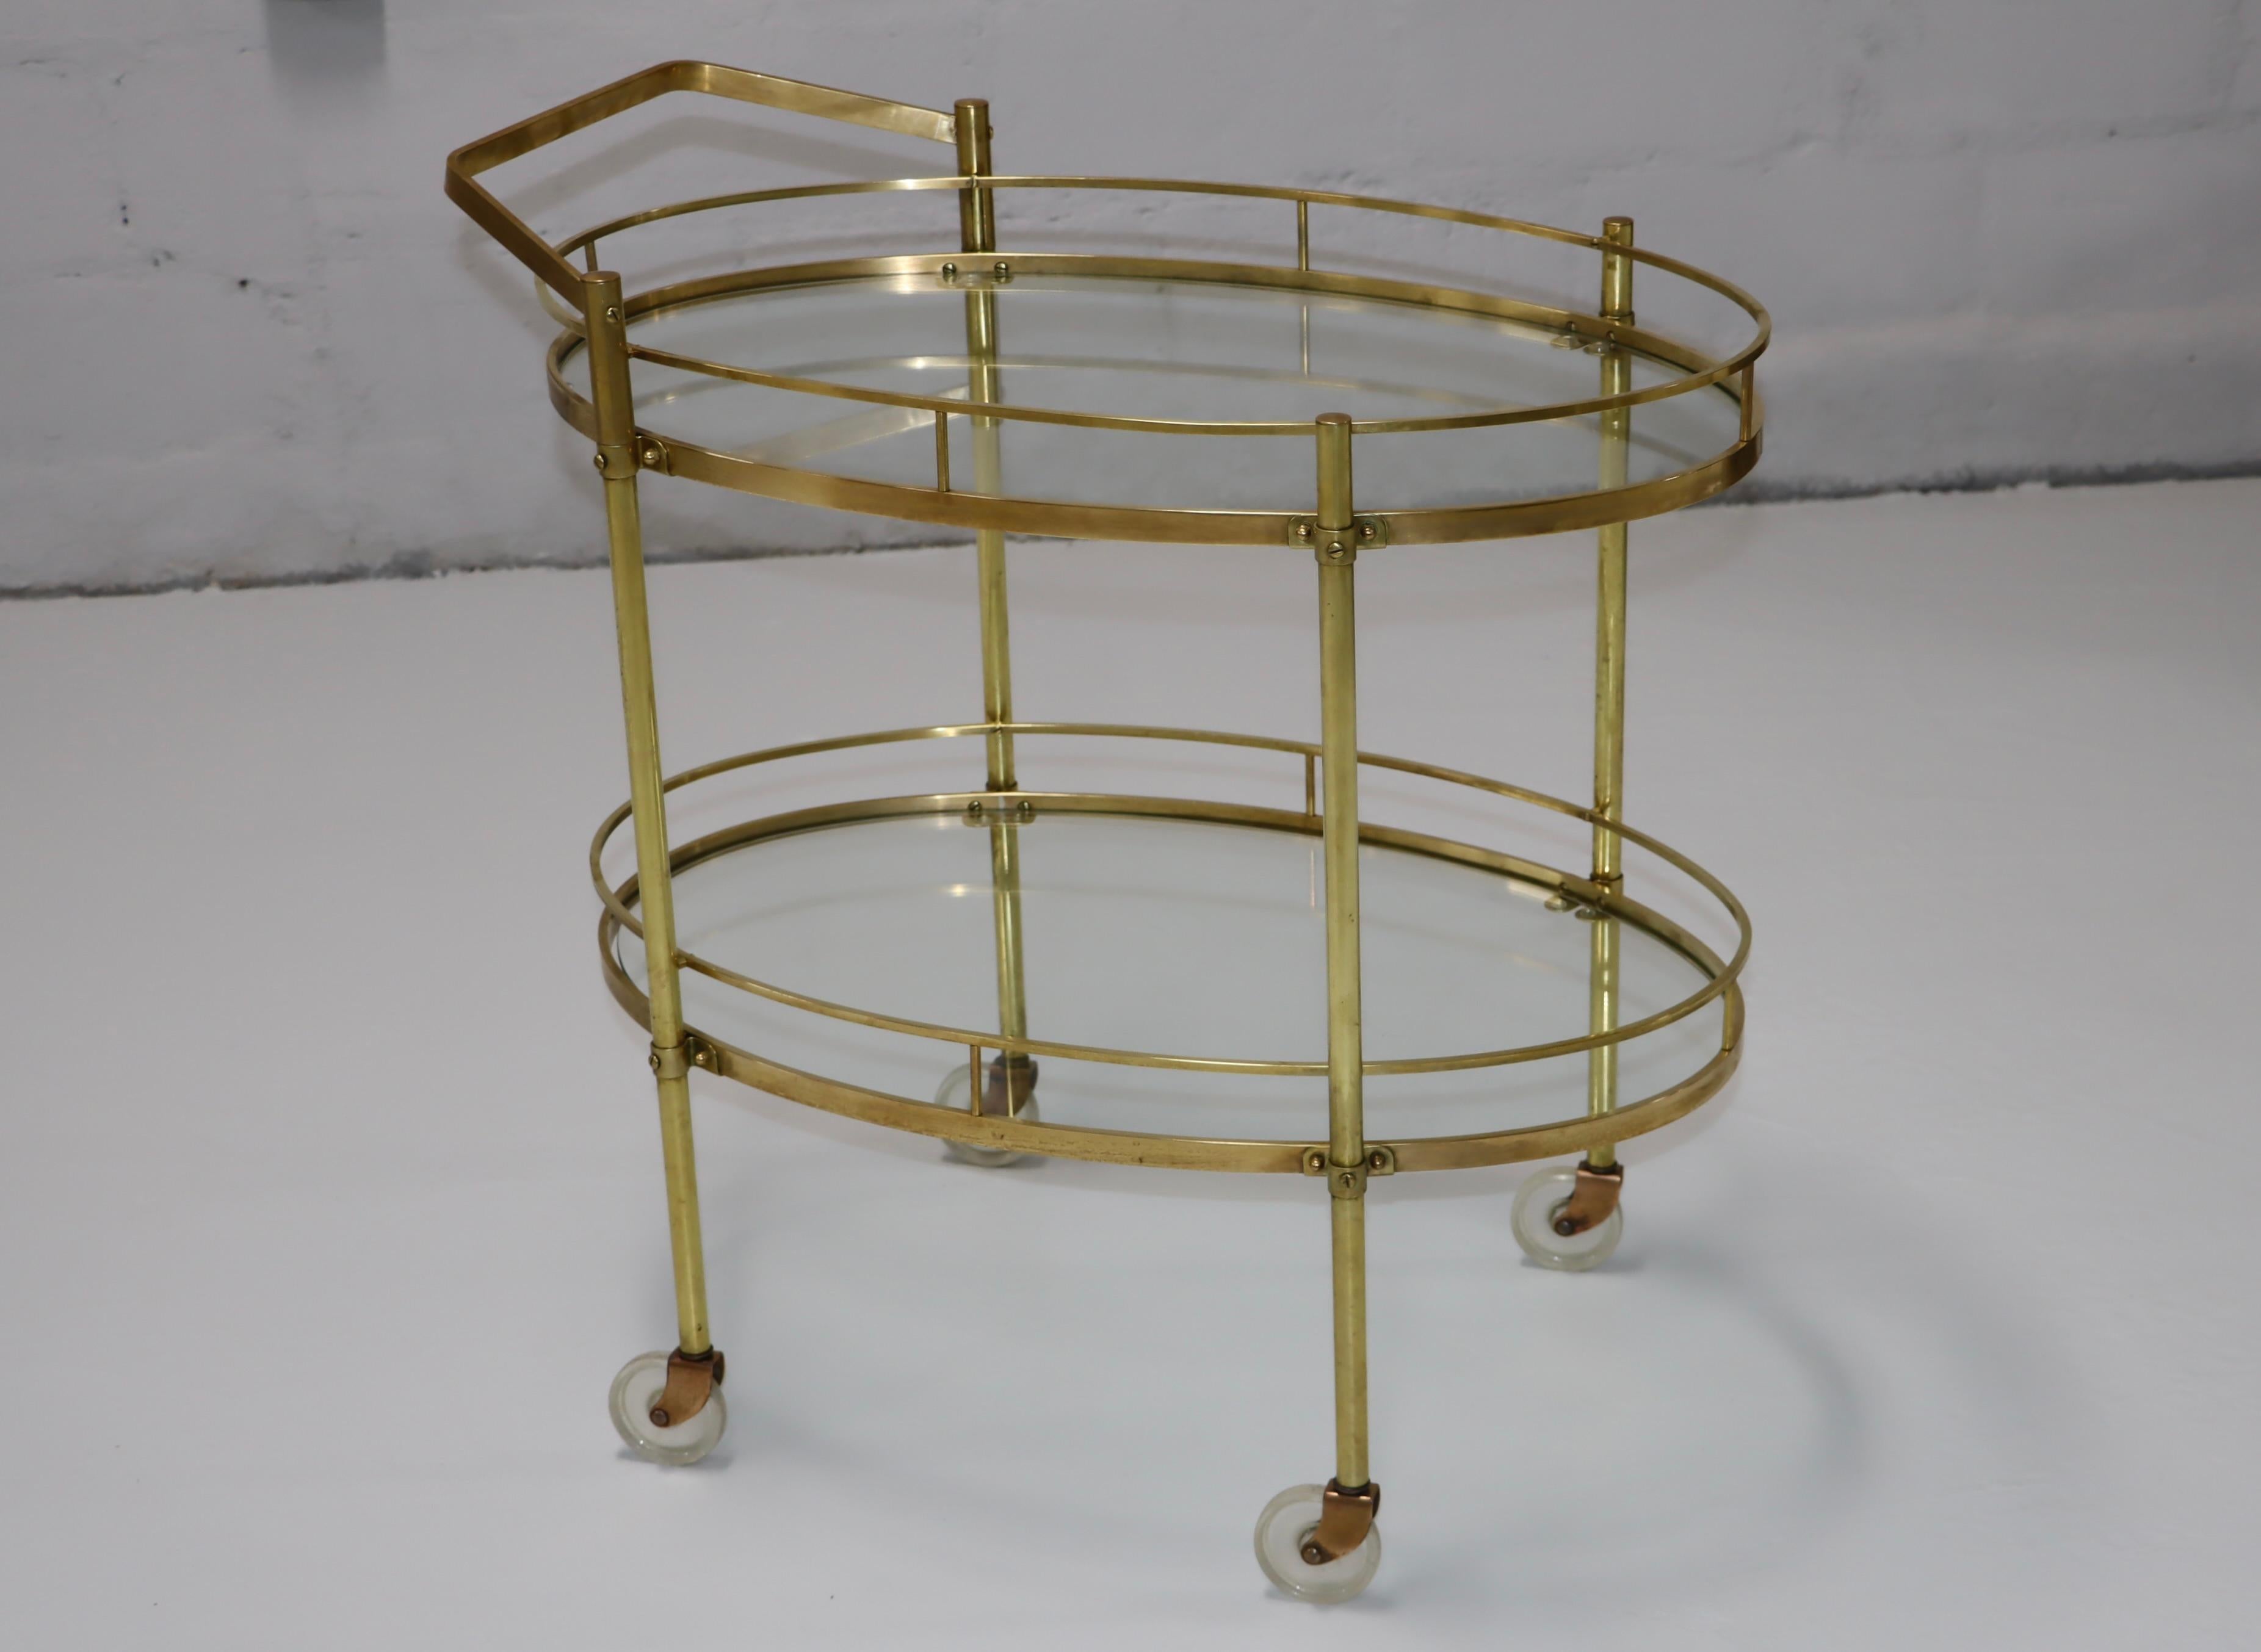 1950's solid brass Italian two tier oval bar cart with removable handle and glass shelves, lightly hand polished with some wear and patina to the brass due to age and use.